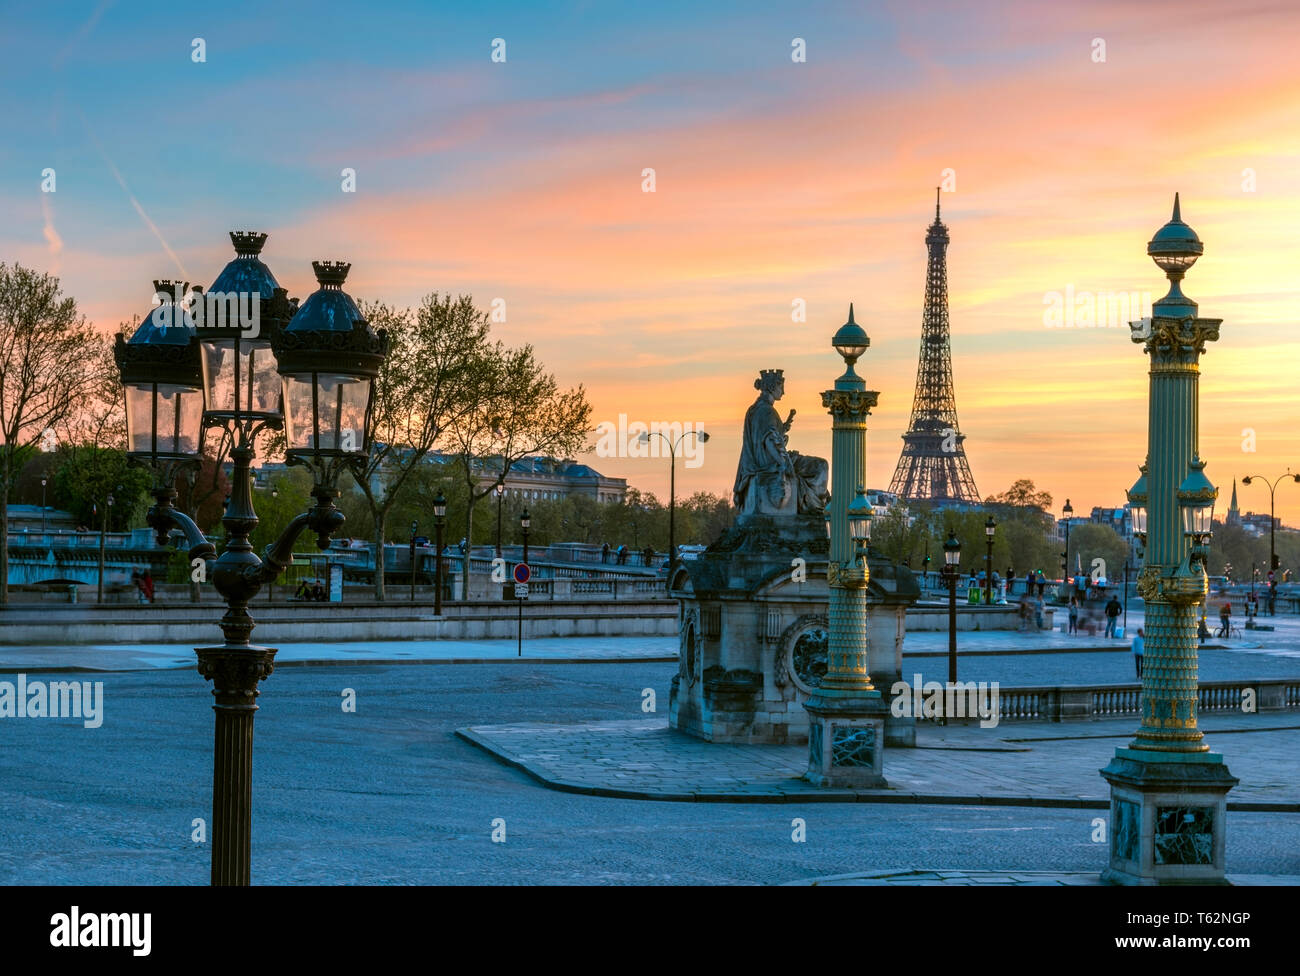 Evening, colorful view  at dusk of the Place De La Concorde during the spring in Paris, France. Stock Photo